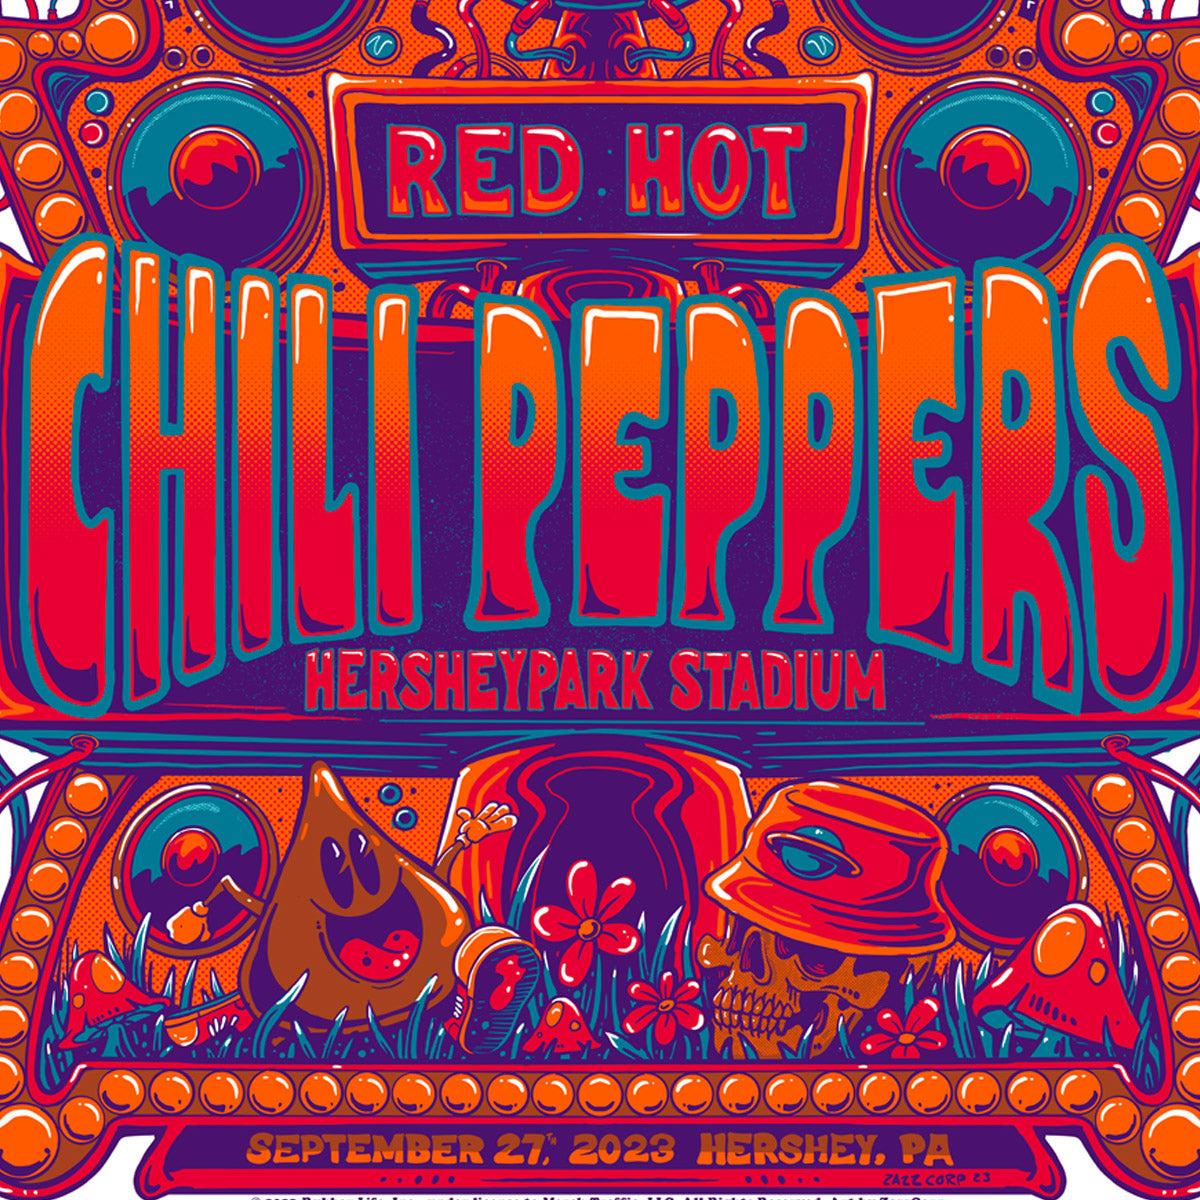 Red Hot Chili Peppers Hershey September 27, 2023